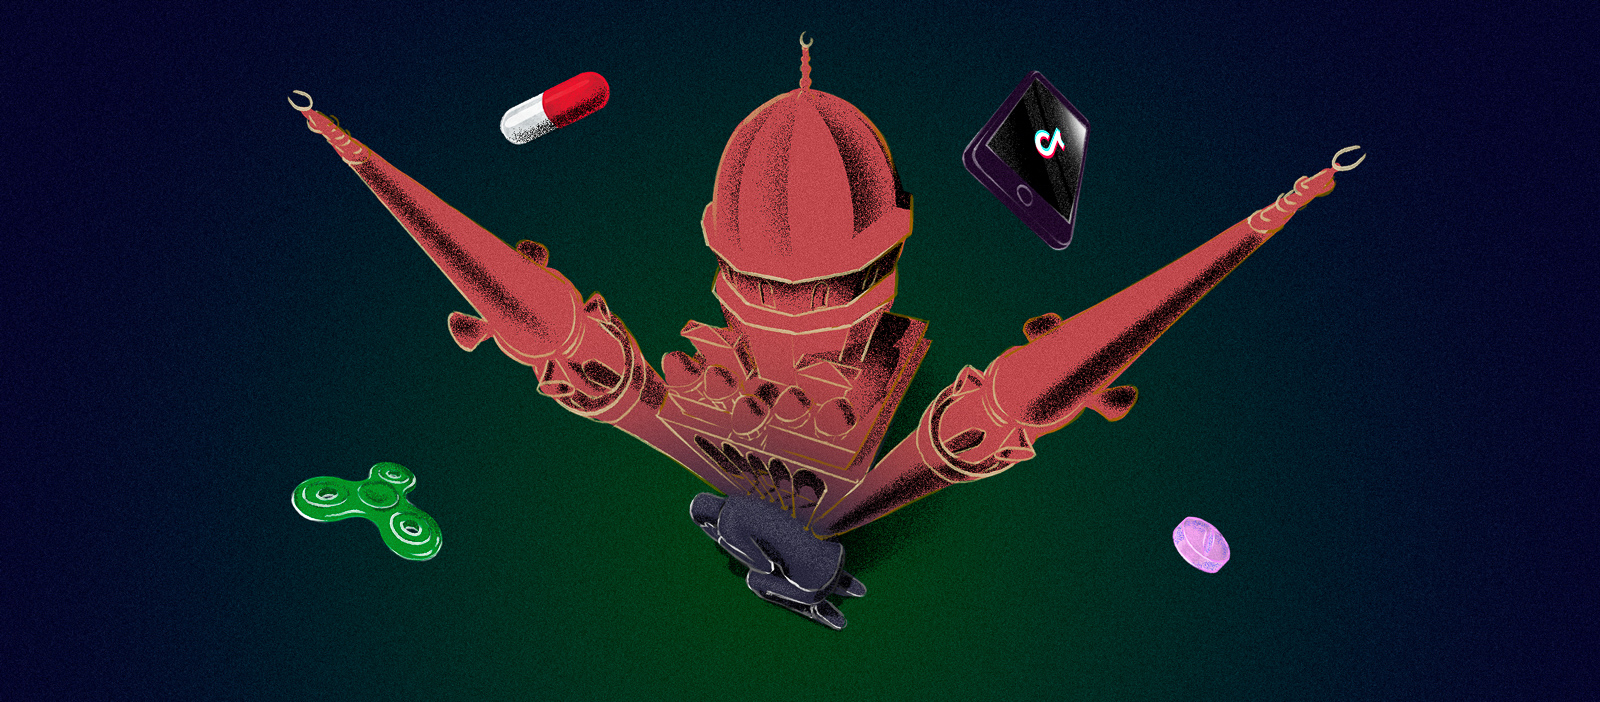 The illustration presents a surreal and artistic scene against a dark green background. A large, intricate red-brown mosque placed on a person on the bottom of the composition. the scene is surrounded with floating fidget spinner, pills and phone showing Tiktok